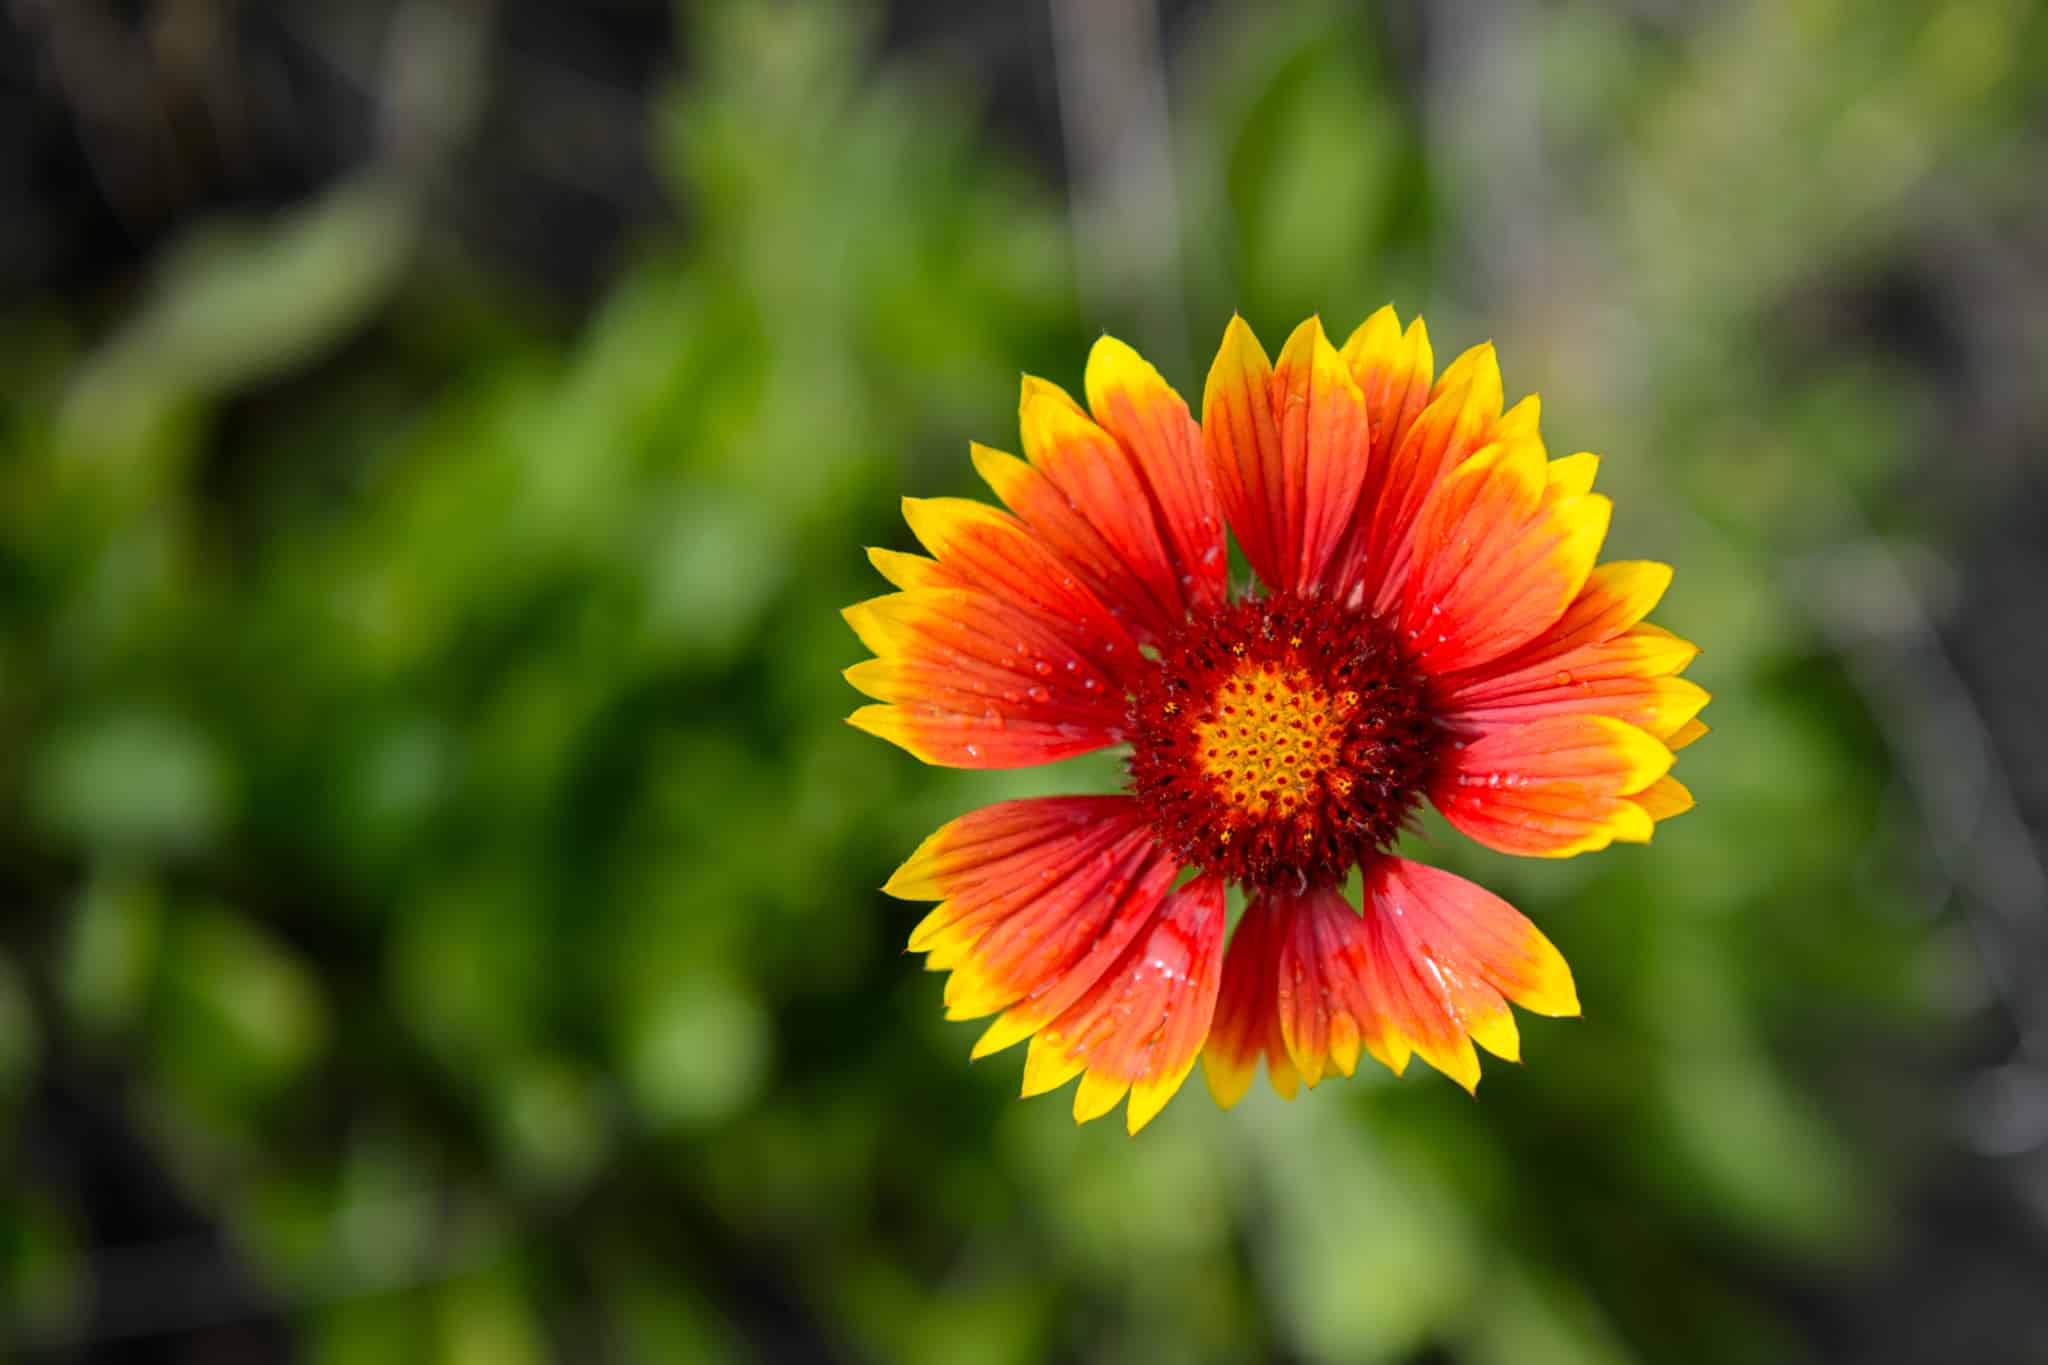 This Gaillardia was found growing in the day use area adjacent to Lake San Cristobal, near Lake City, Colorado.